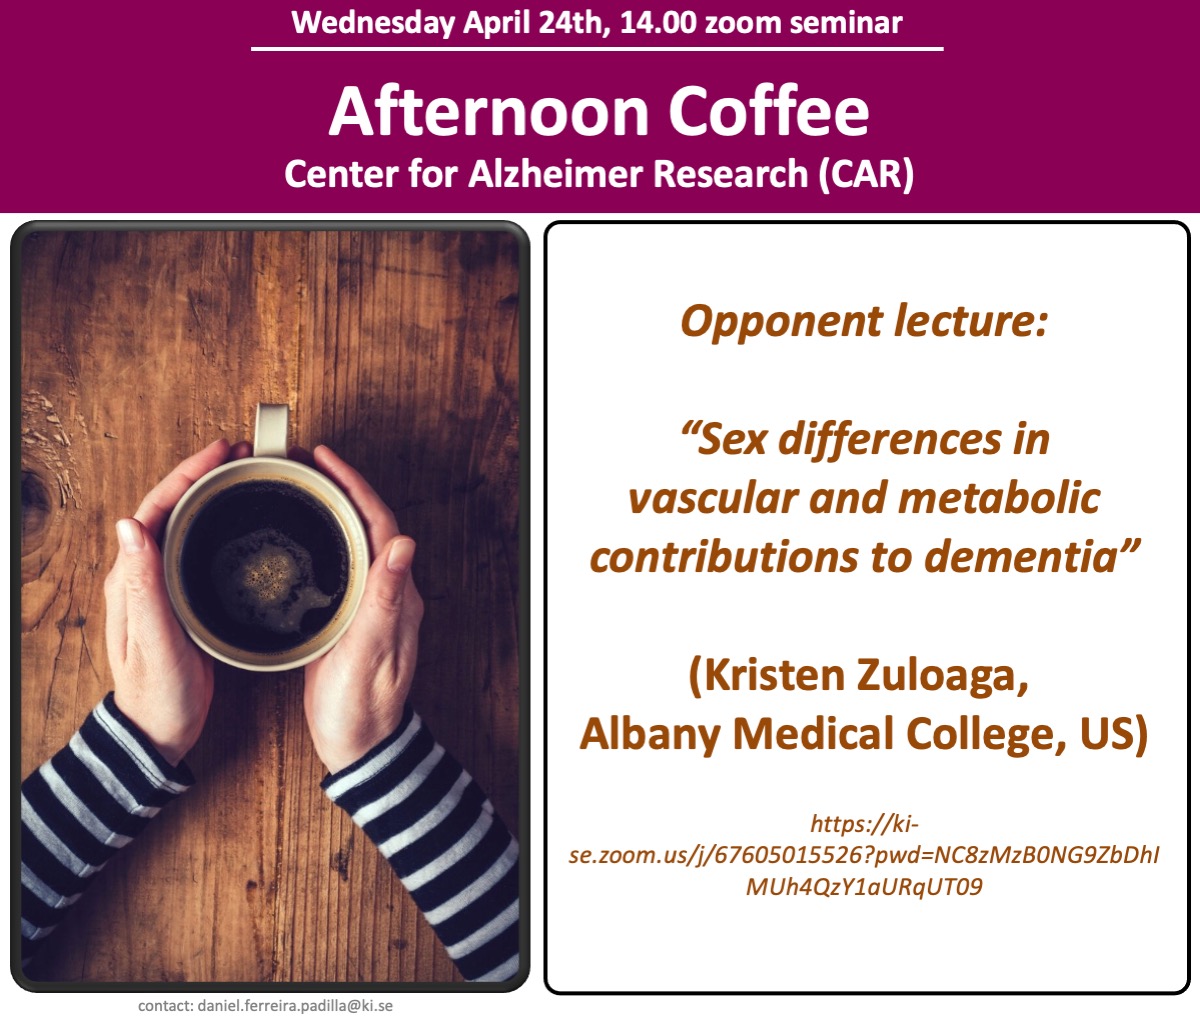 Tomorrow Wednesday at 2 pm CEST!! Dr. Kristen Zuloaga from Albany Medical College (US) will be at our Opponent Lecture series speaking about Sex differences in Dementia. PM or mail to daniel.ferreira.padilla@ki.se for zoom link
@Zuloaga_Lab 
@StratNeuro
@KIpostdocs